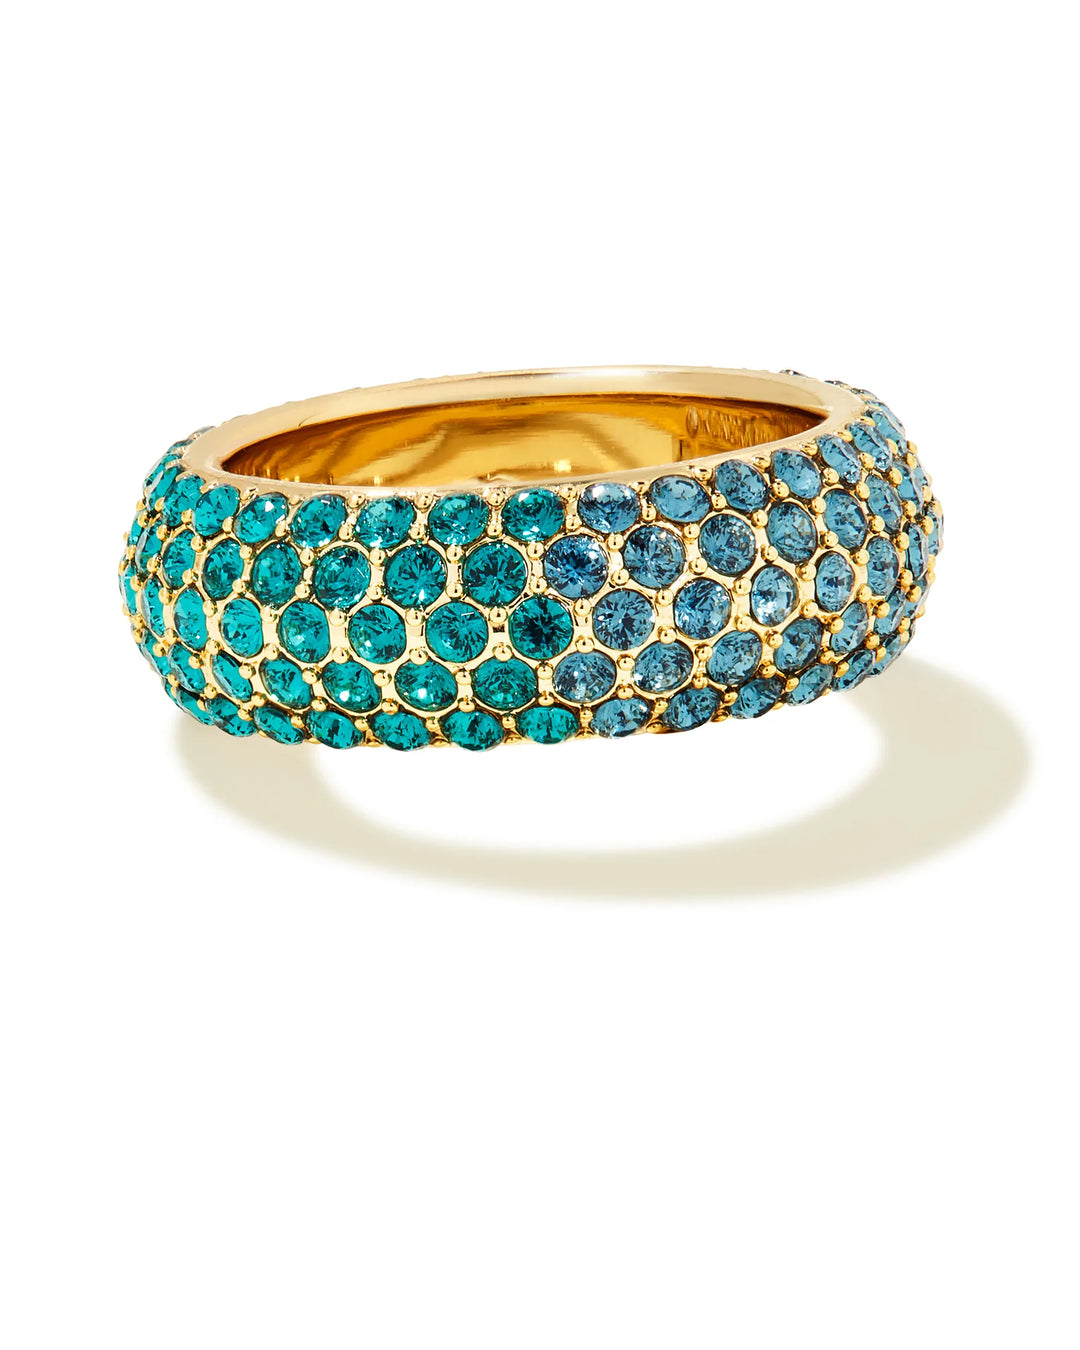 Kendra Scott Mikki Pave Band Ring Gold/Green Blue Ombre